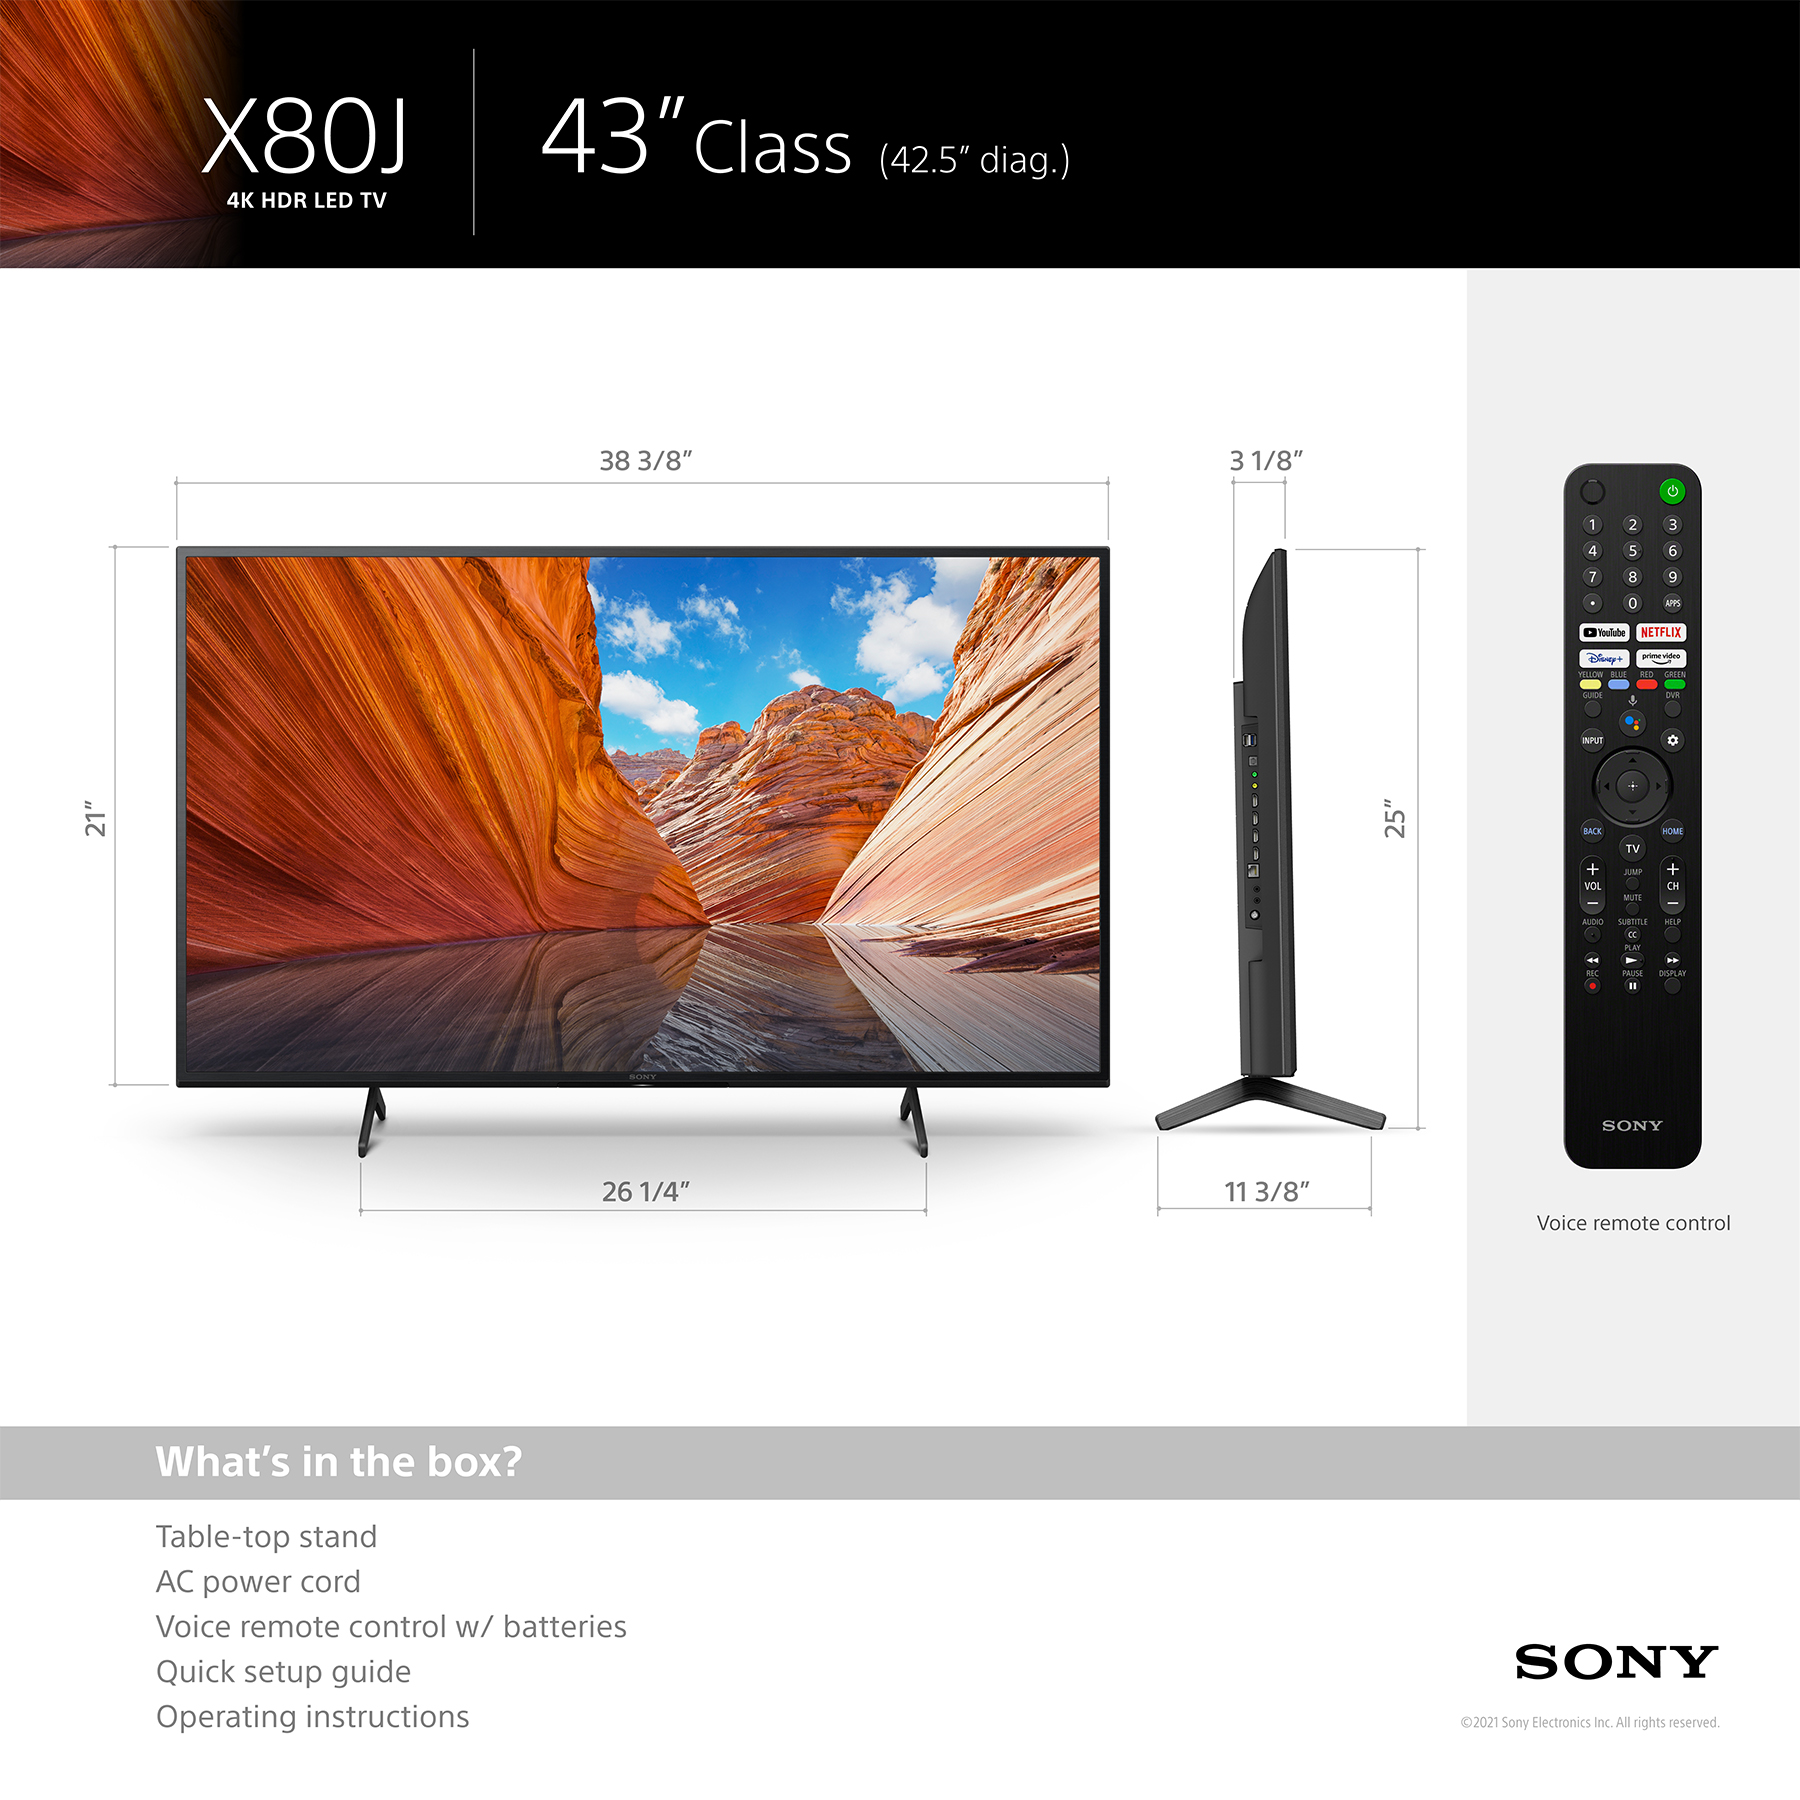 Sony 43" Class KD43X80J 4K Ultra HD LED Smart Google TV with Dolby Vision HDR X80J Series 2021 model - image 8 of 14